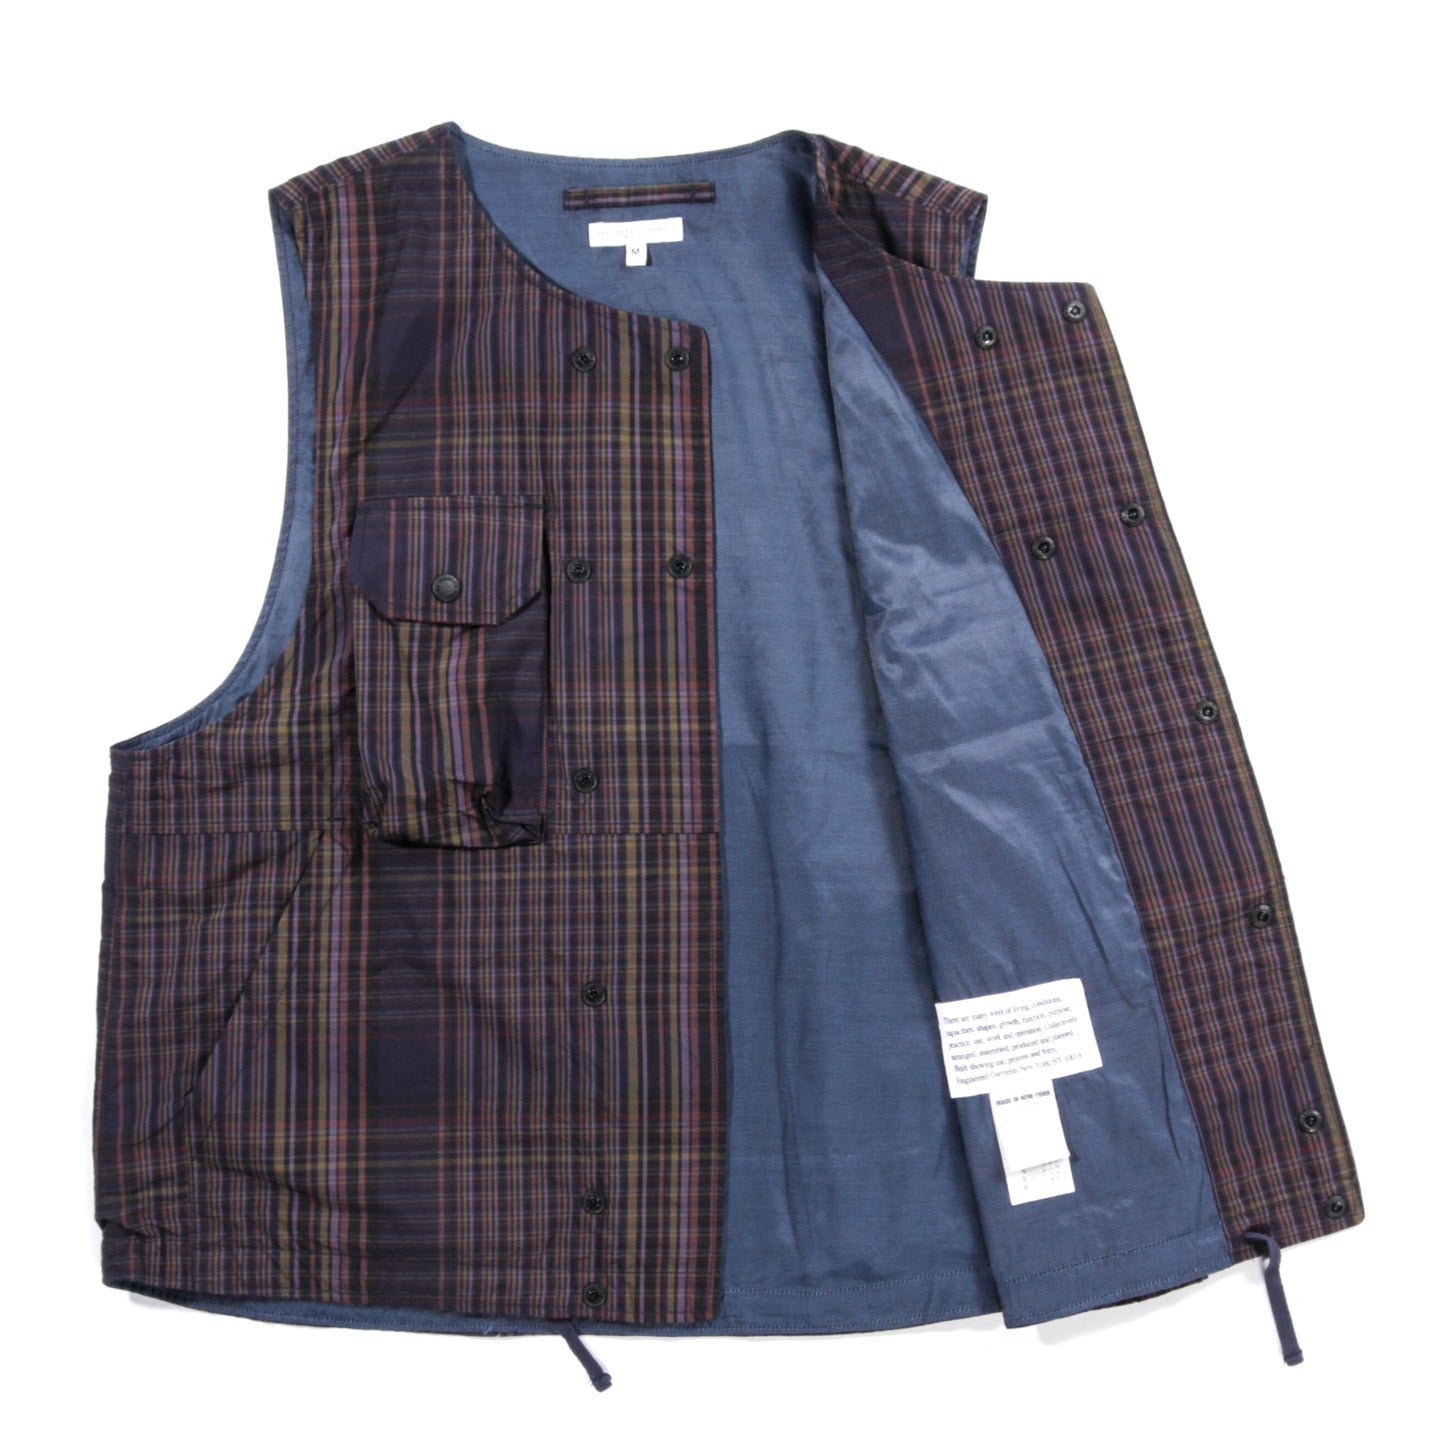 ENGINEERED GARMENTS COVER VEST MULTI COLOR NYCO PLAID